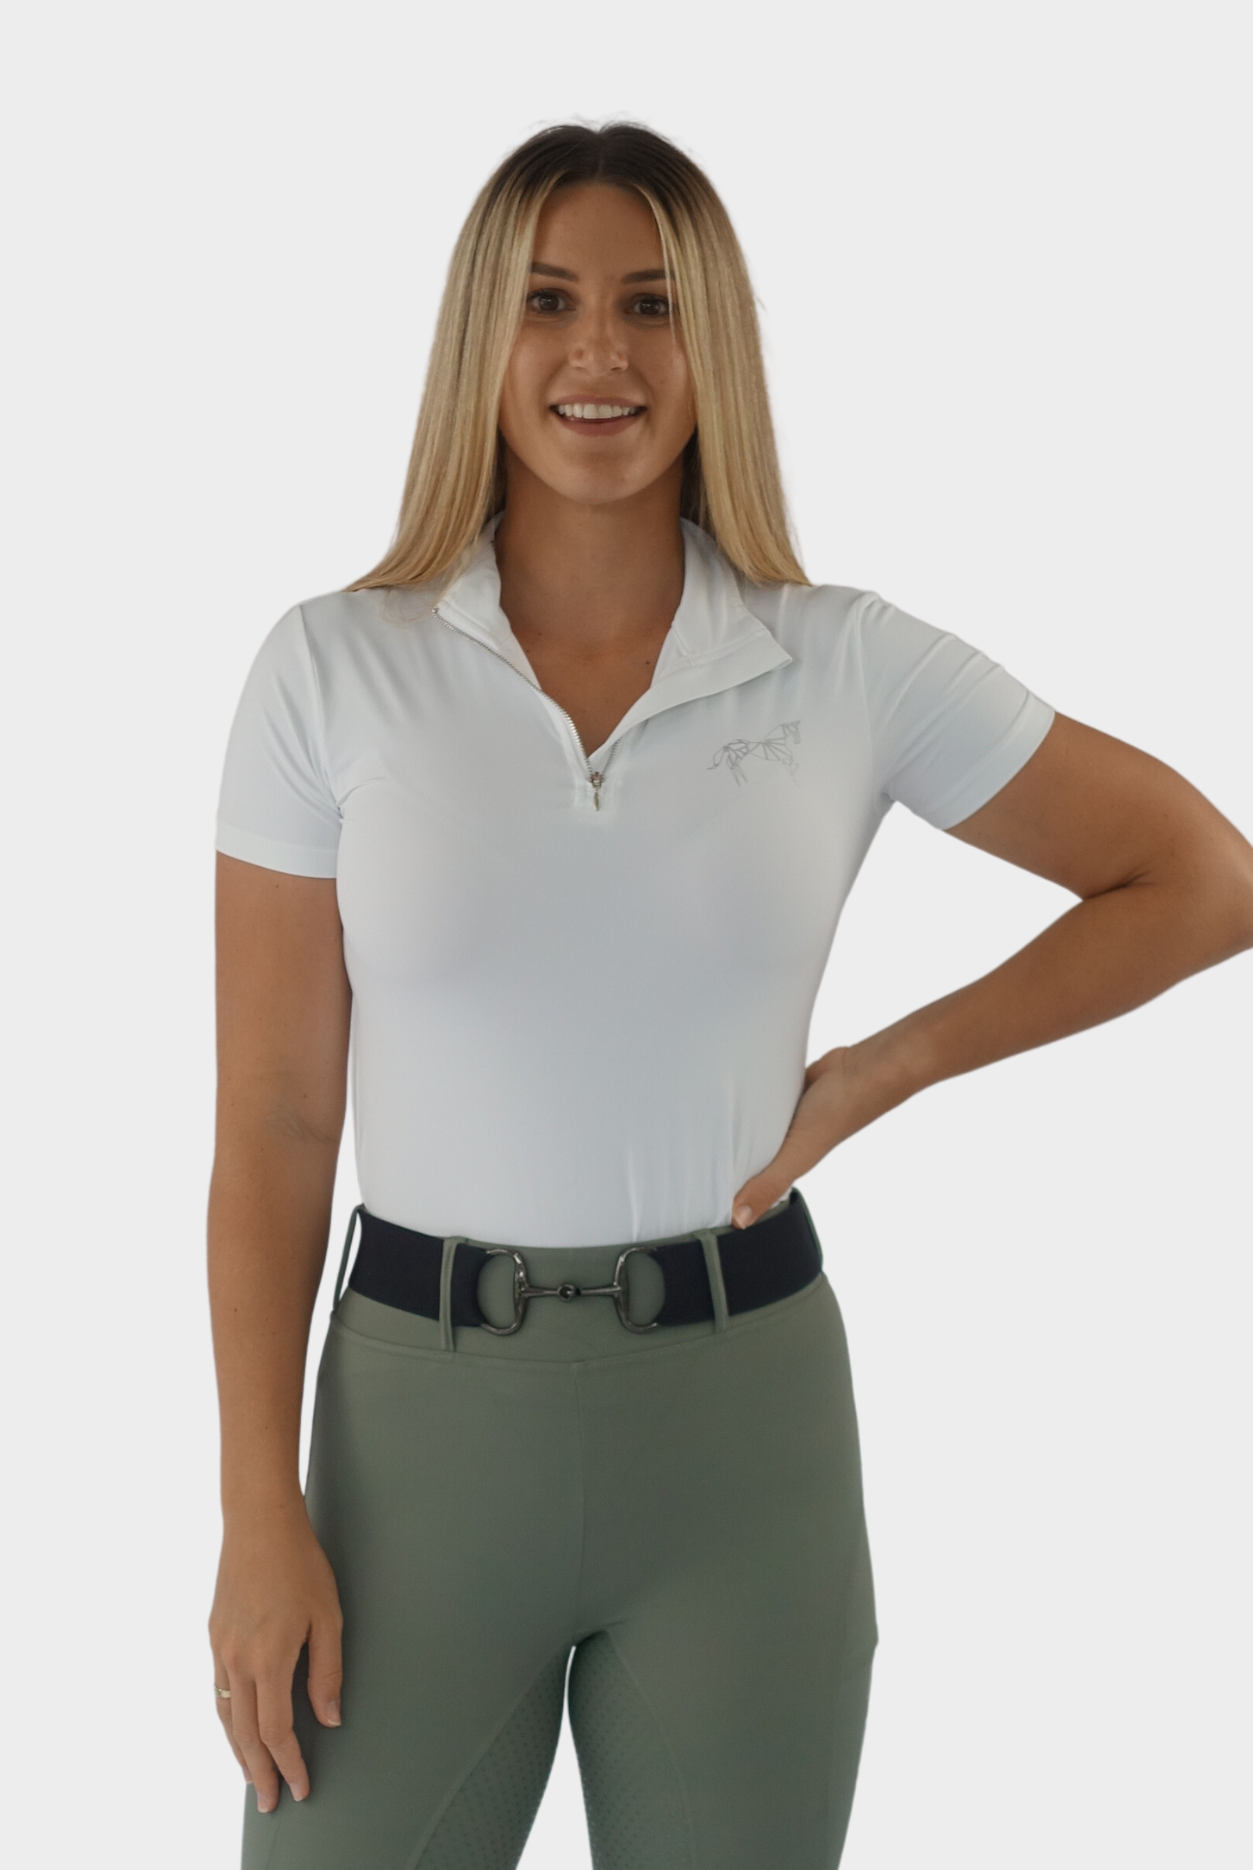 Versatile white equestrian base layer suitable for various disciplines, from dressage to show jumping, providing comfort and style.